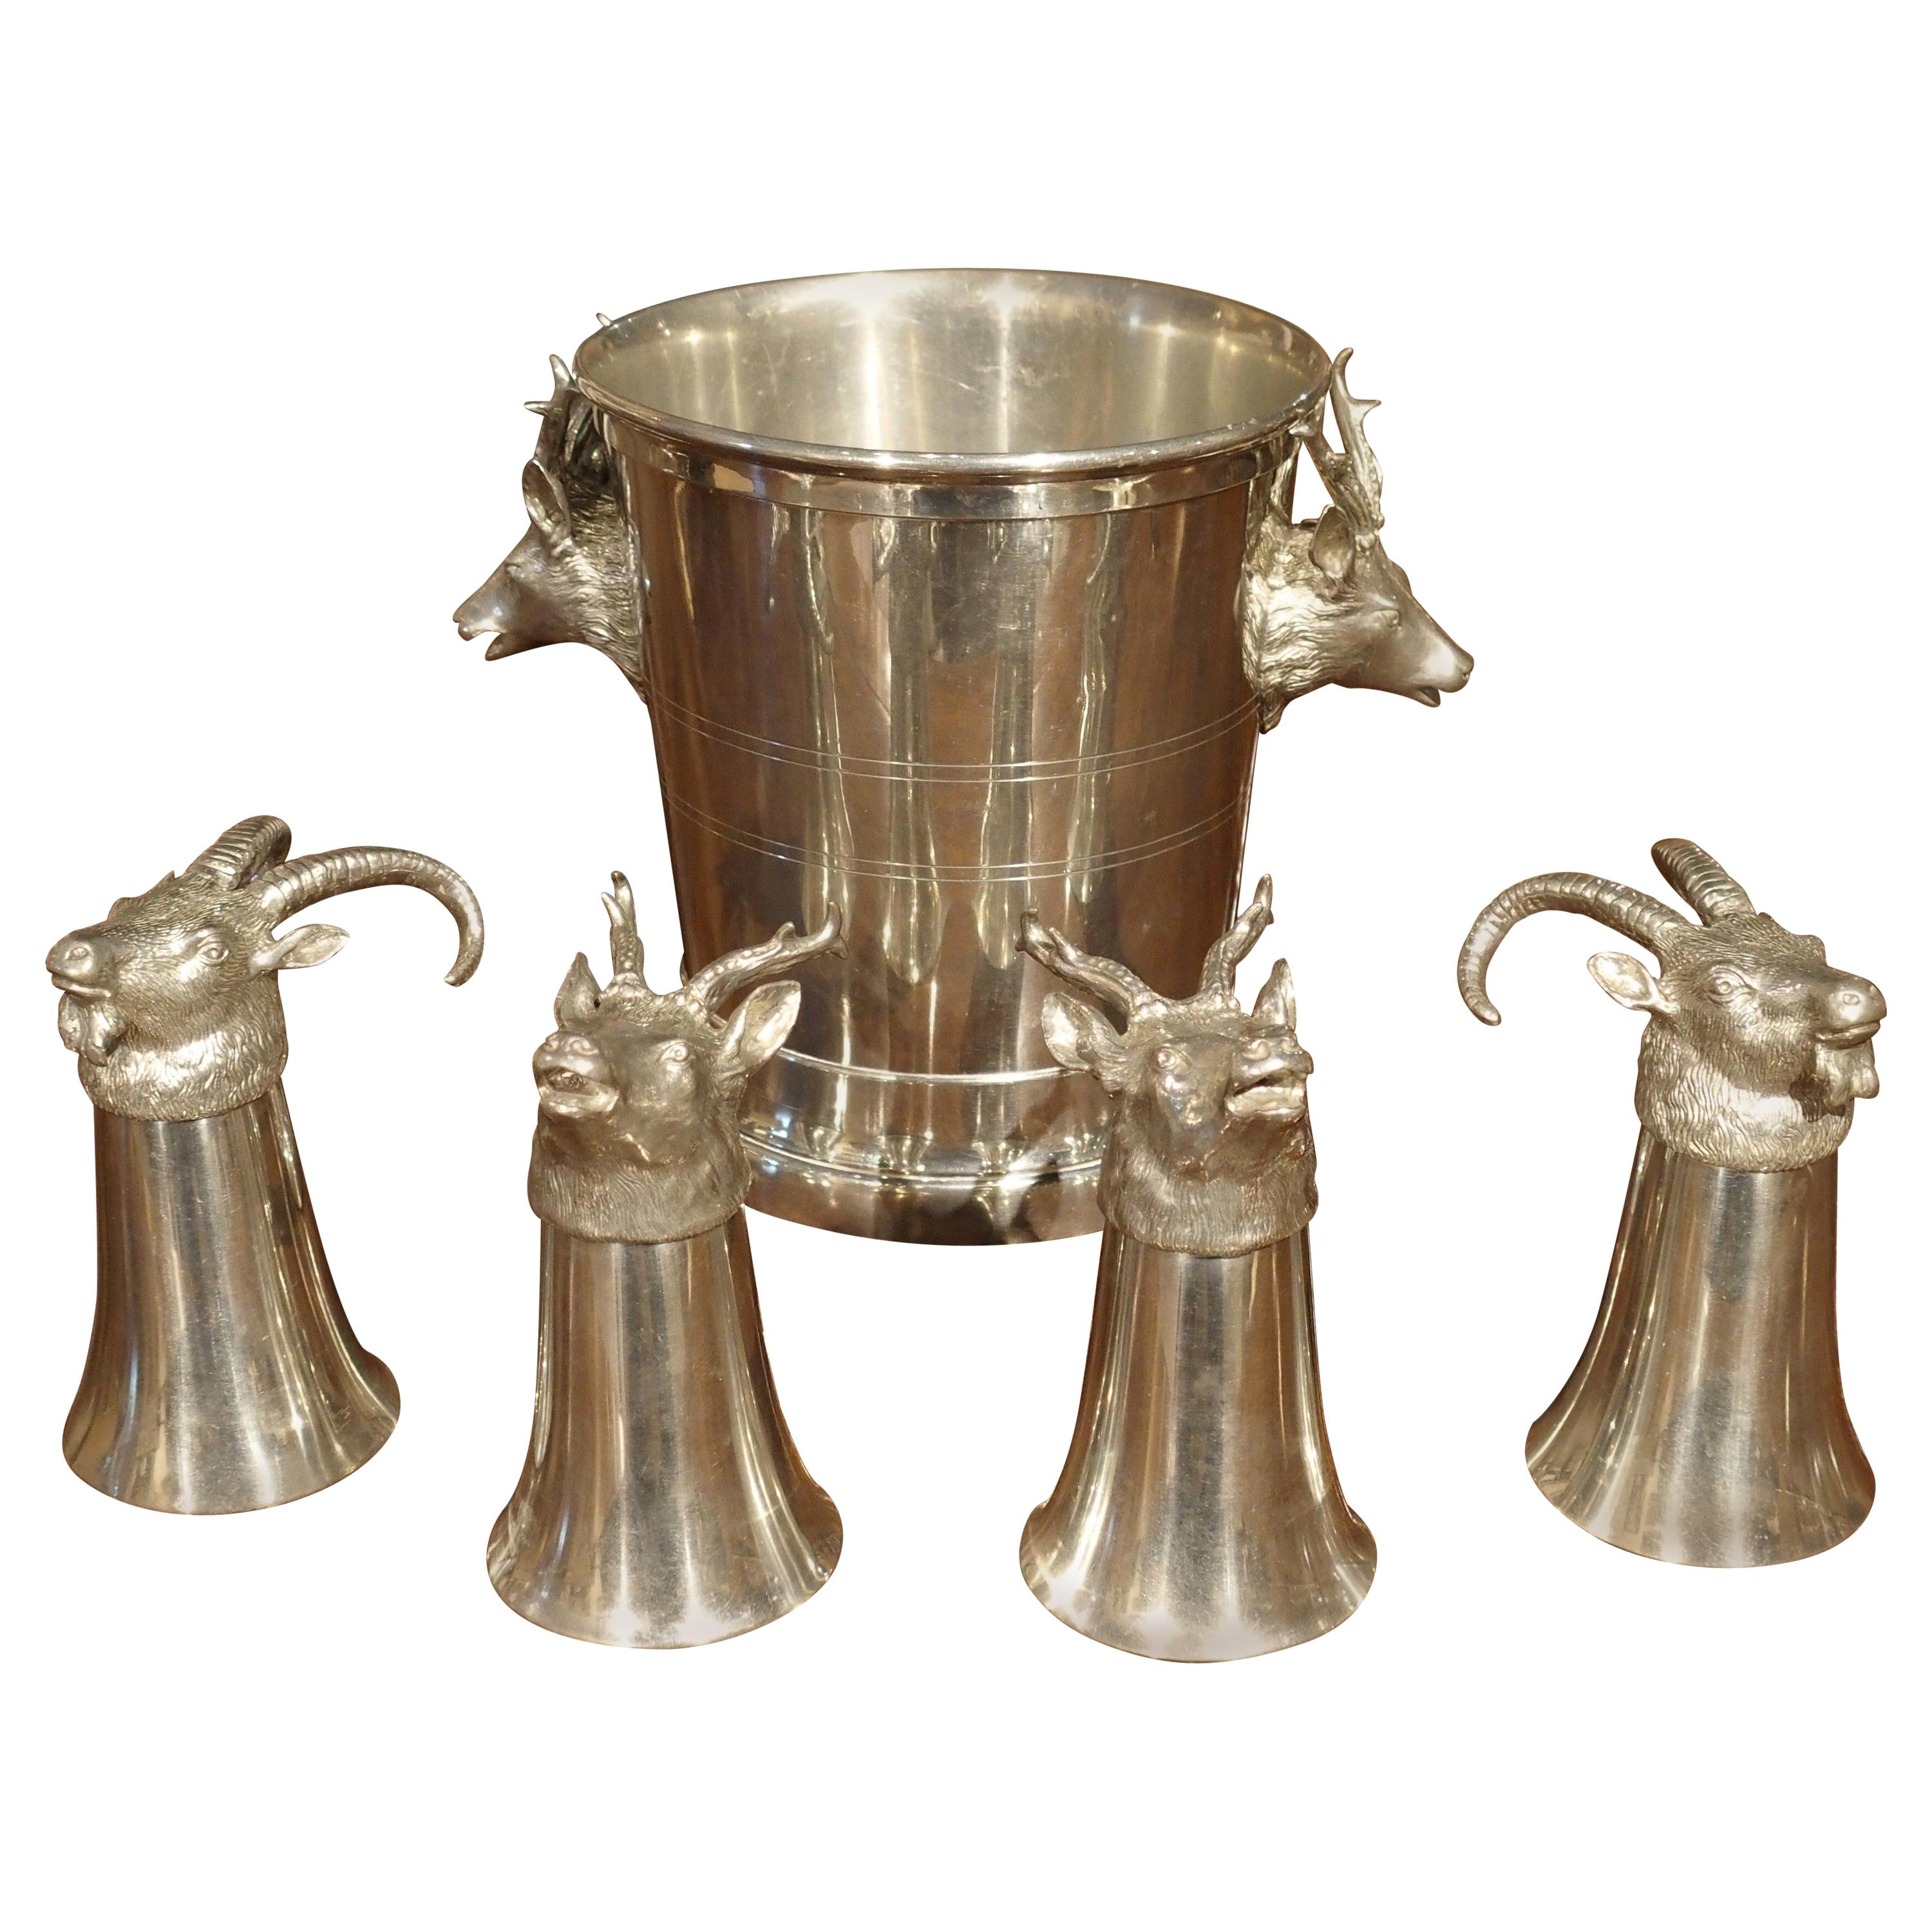 Set of 4 Polished Pewter Stag and Ibex Stirrup Cups with Ice Bucket